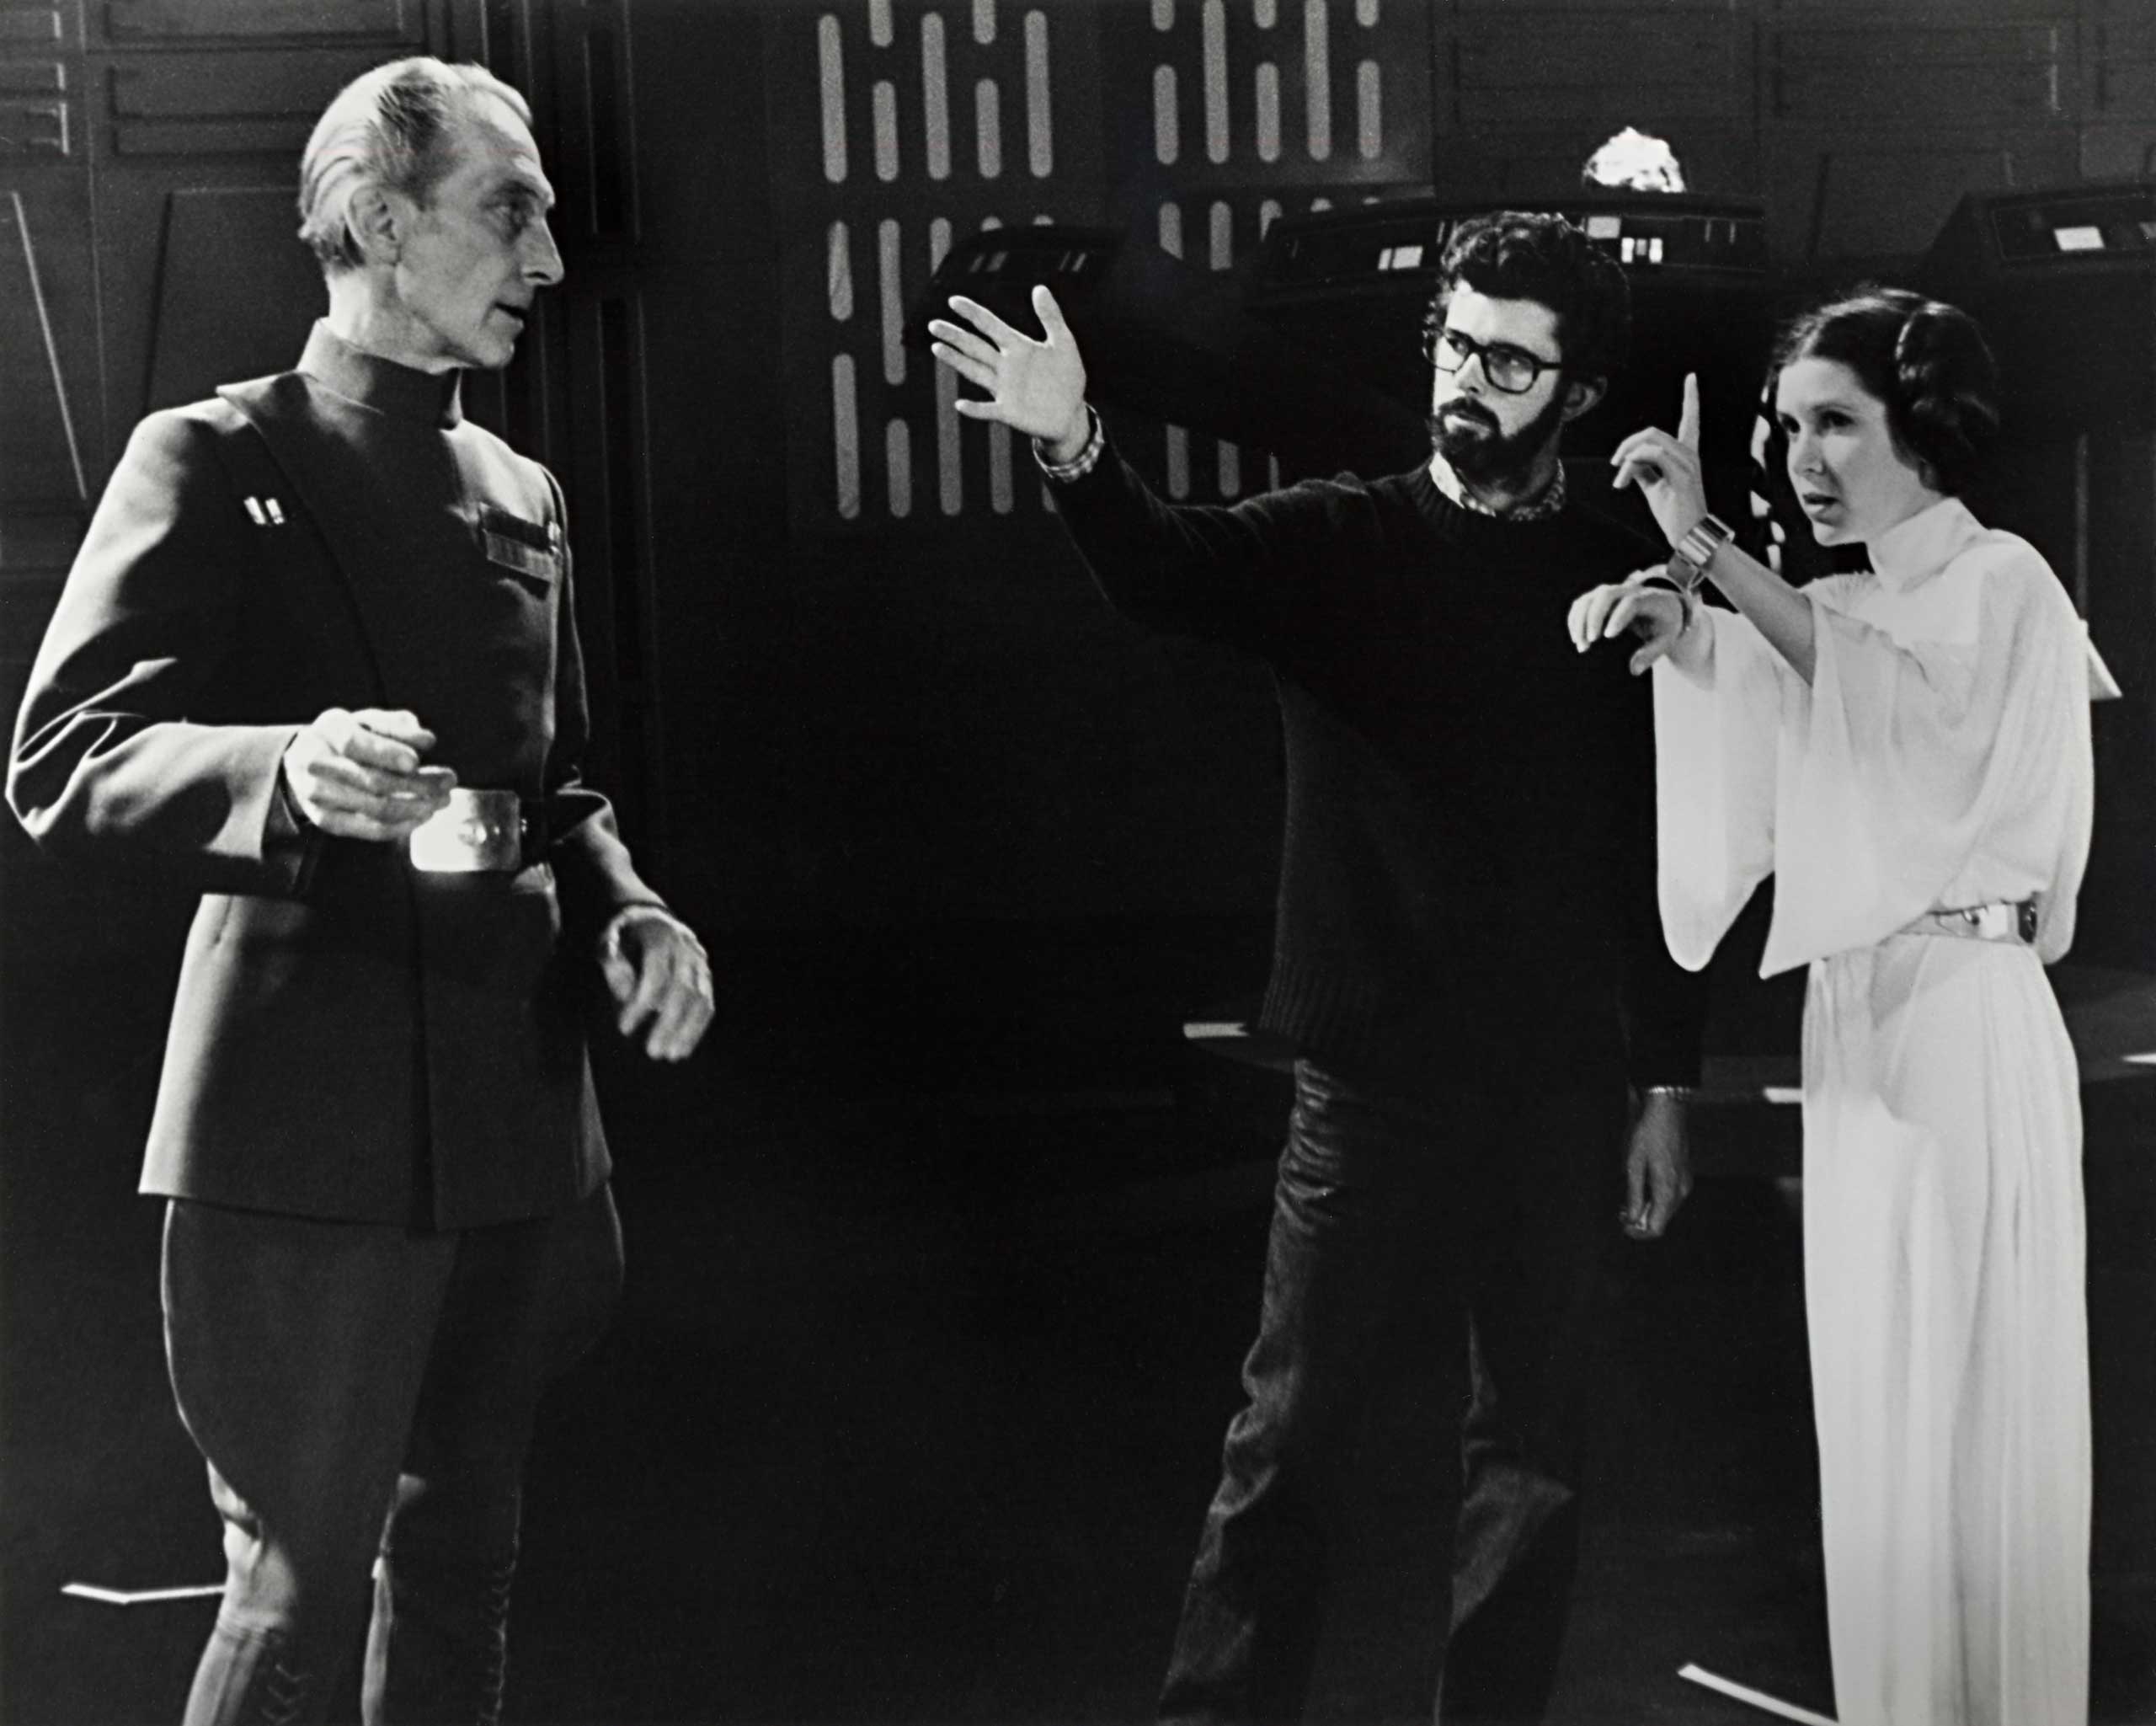 Lucas directs Peter Cushing (Grand Moff Tarkin) and Carrie Fisher.